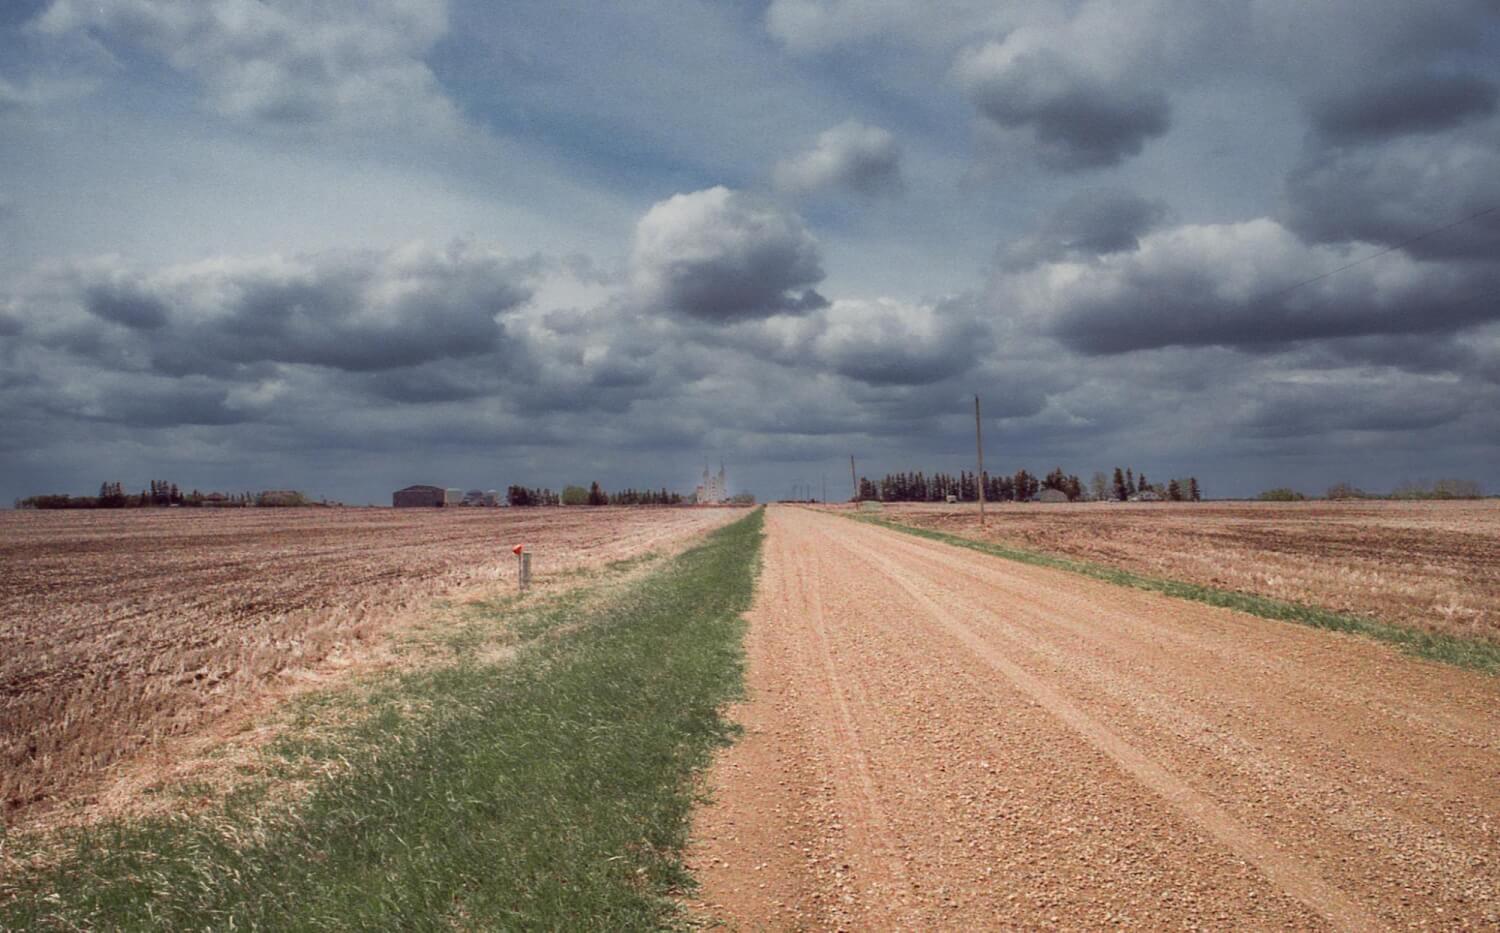 Going Home Again and Leaving with the Big Sky - Kodak Portra 400 + Mamiya M645 1000s